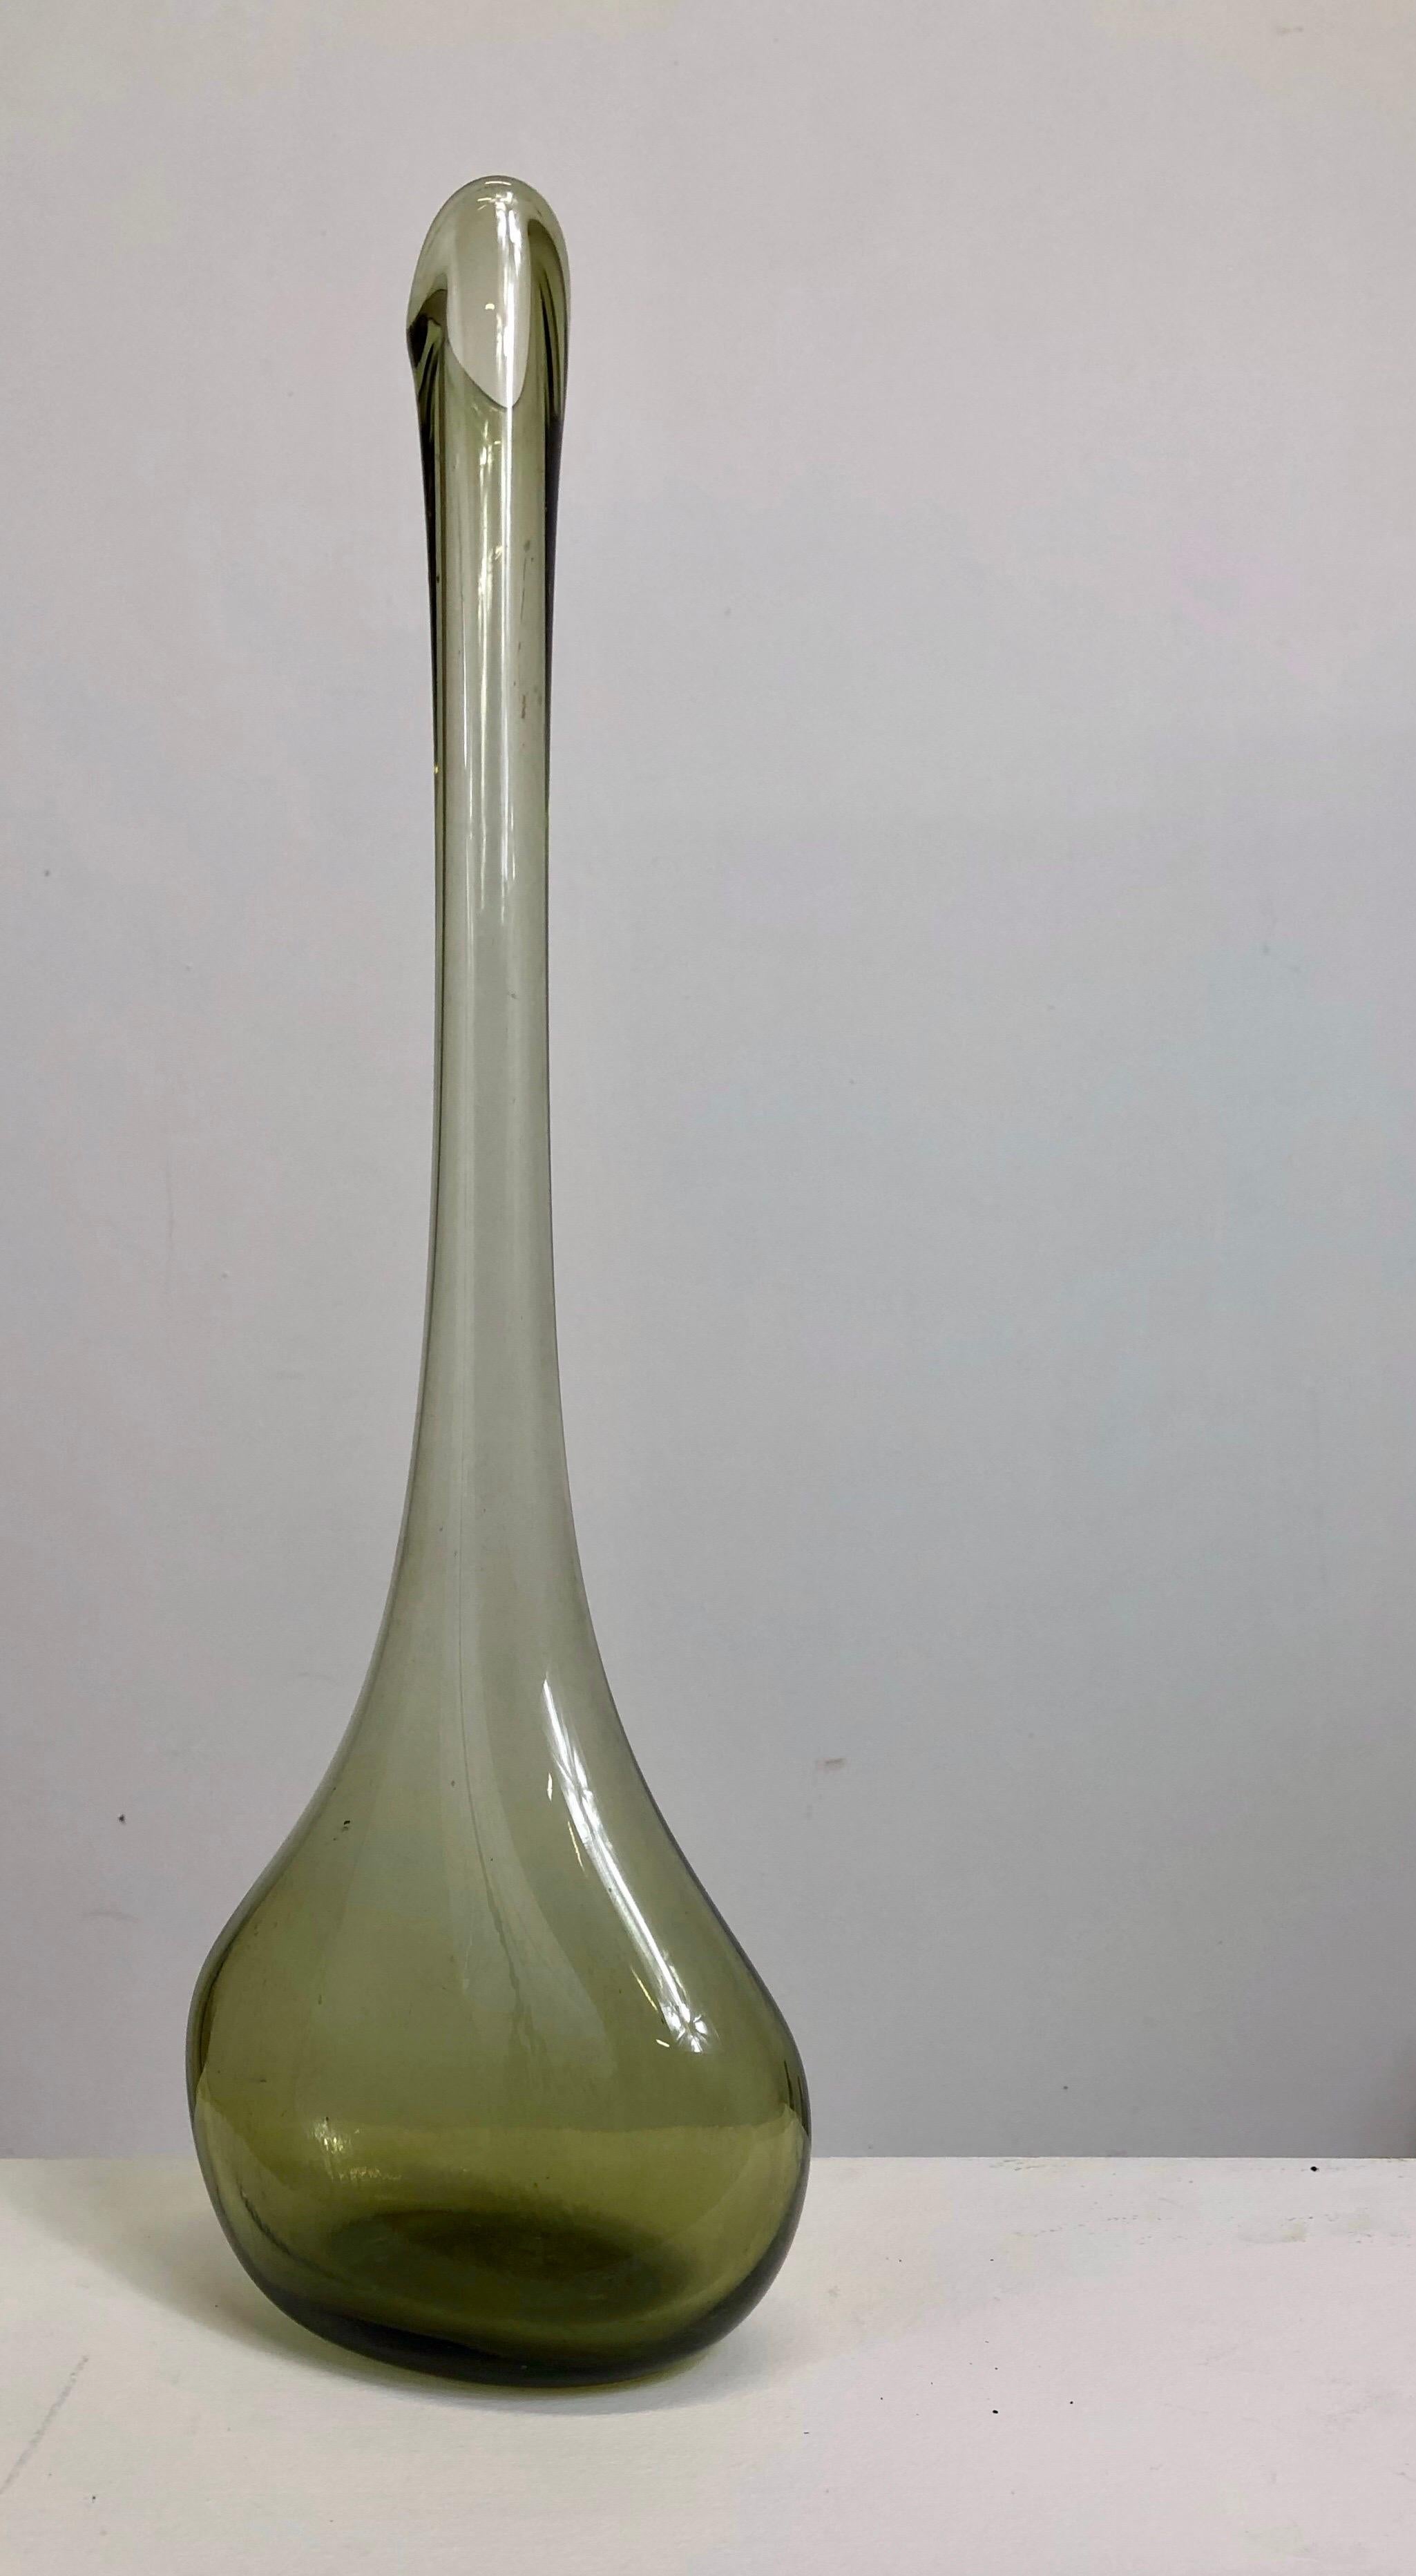 Claude Morin (1932-2021)

One green glass bottle or vase by french artist Claude Morin

Signed and dated on the back.
MORIN 
25 11 78

Original perfect condition.